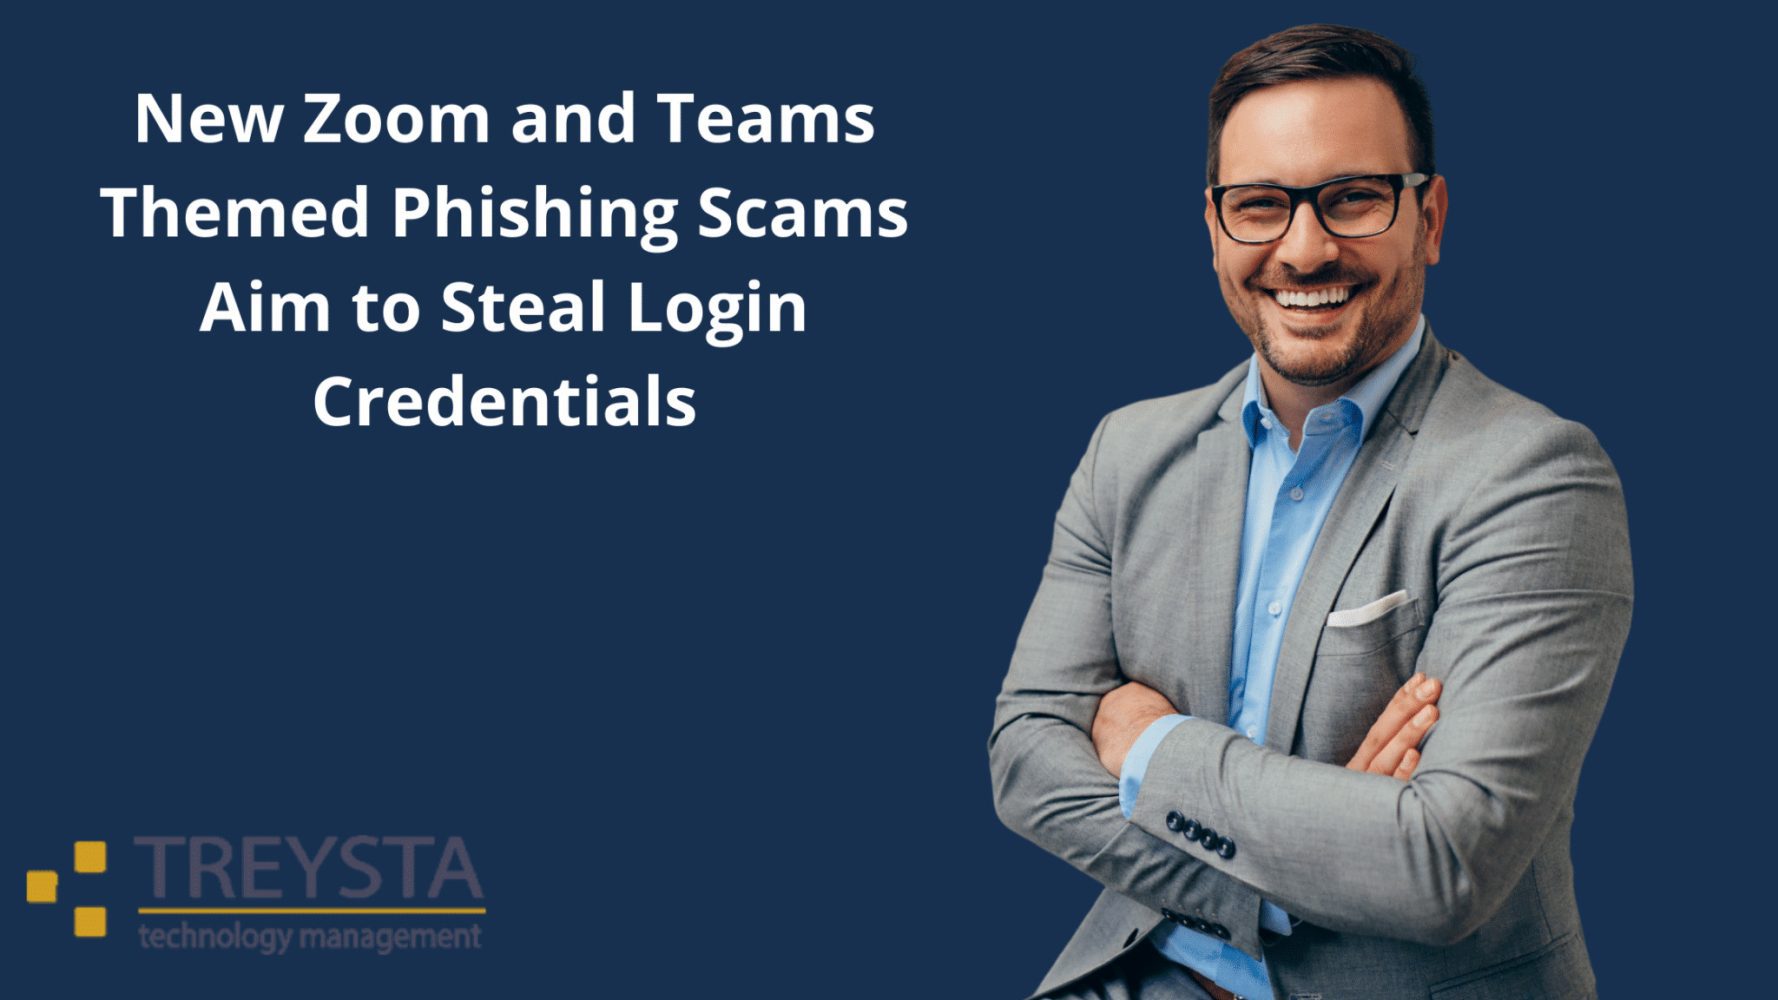 New Zoom and Teams Themed Phishing Scams Aim to Steal Login Credentials 